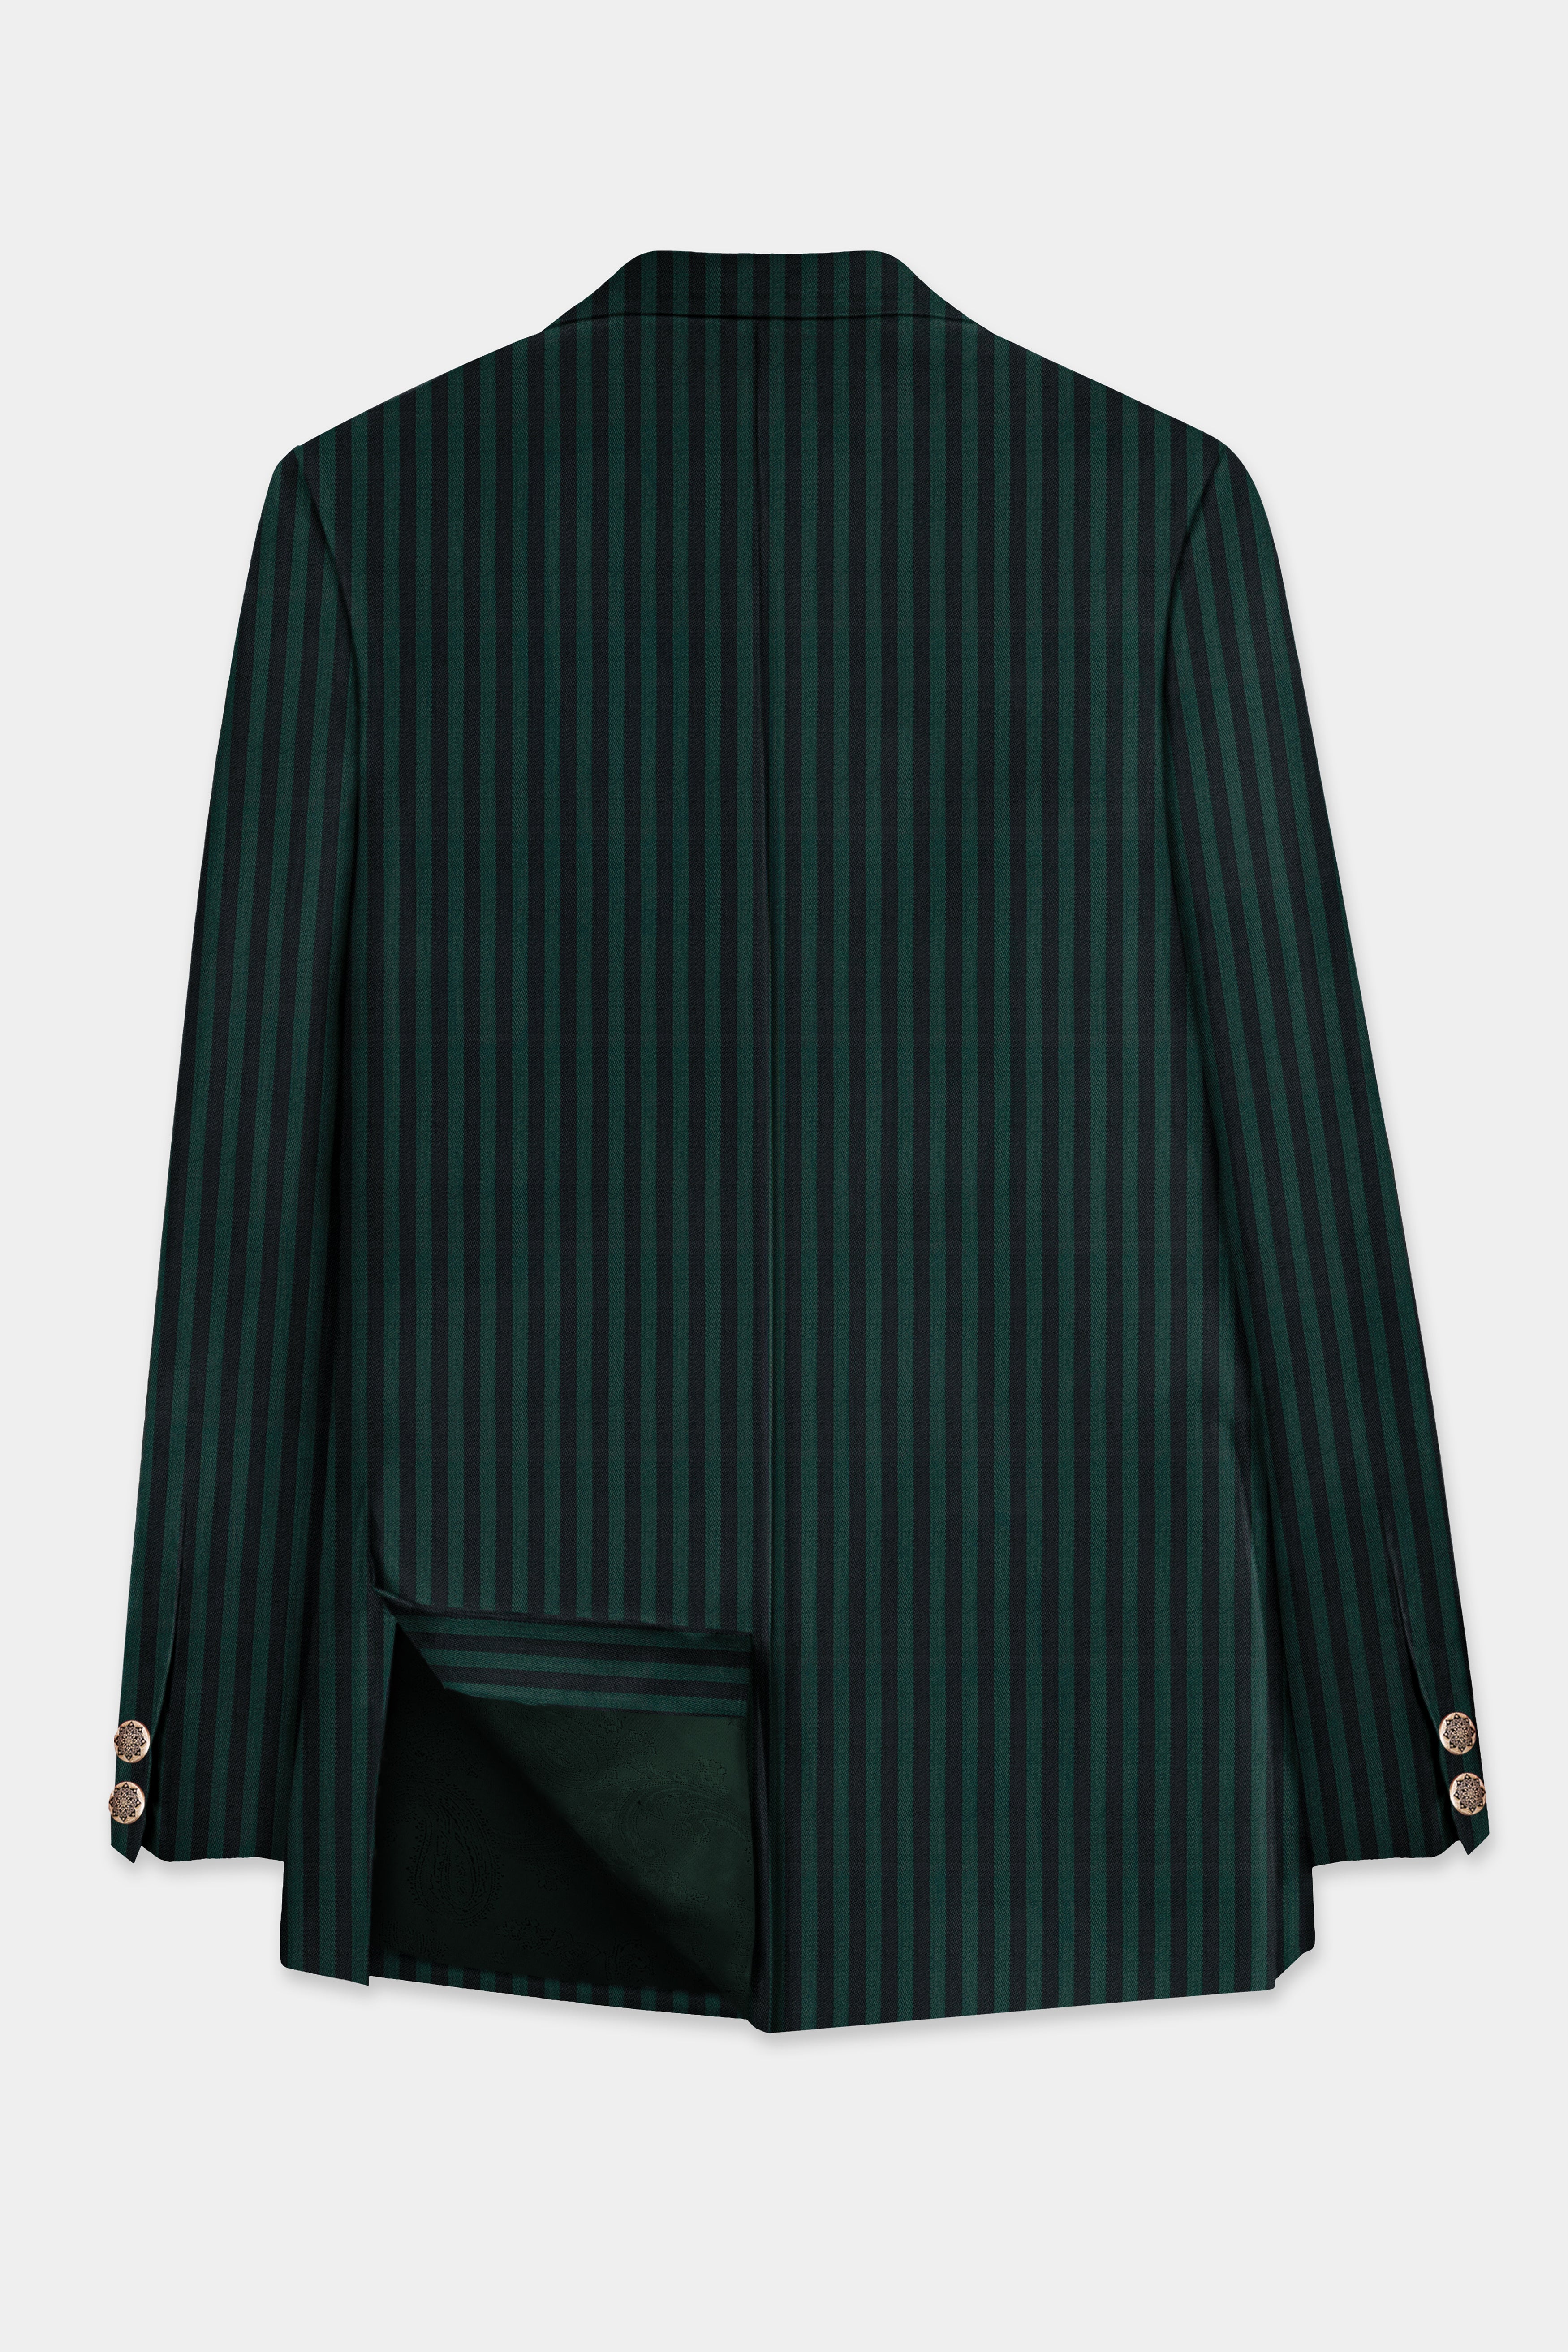 Celtic Green with Black Striped Wool Rich Cross Placket Bandhgala Suit